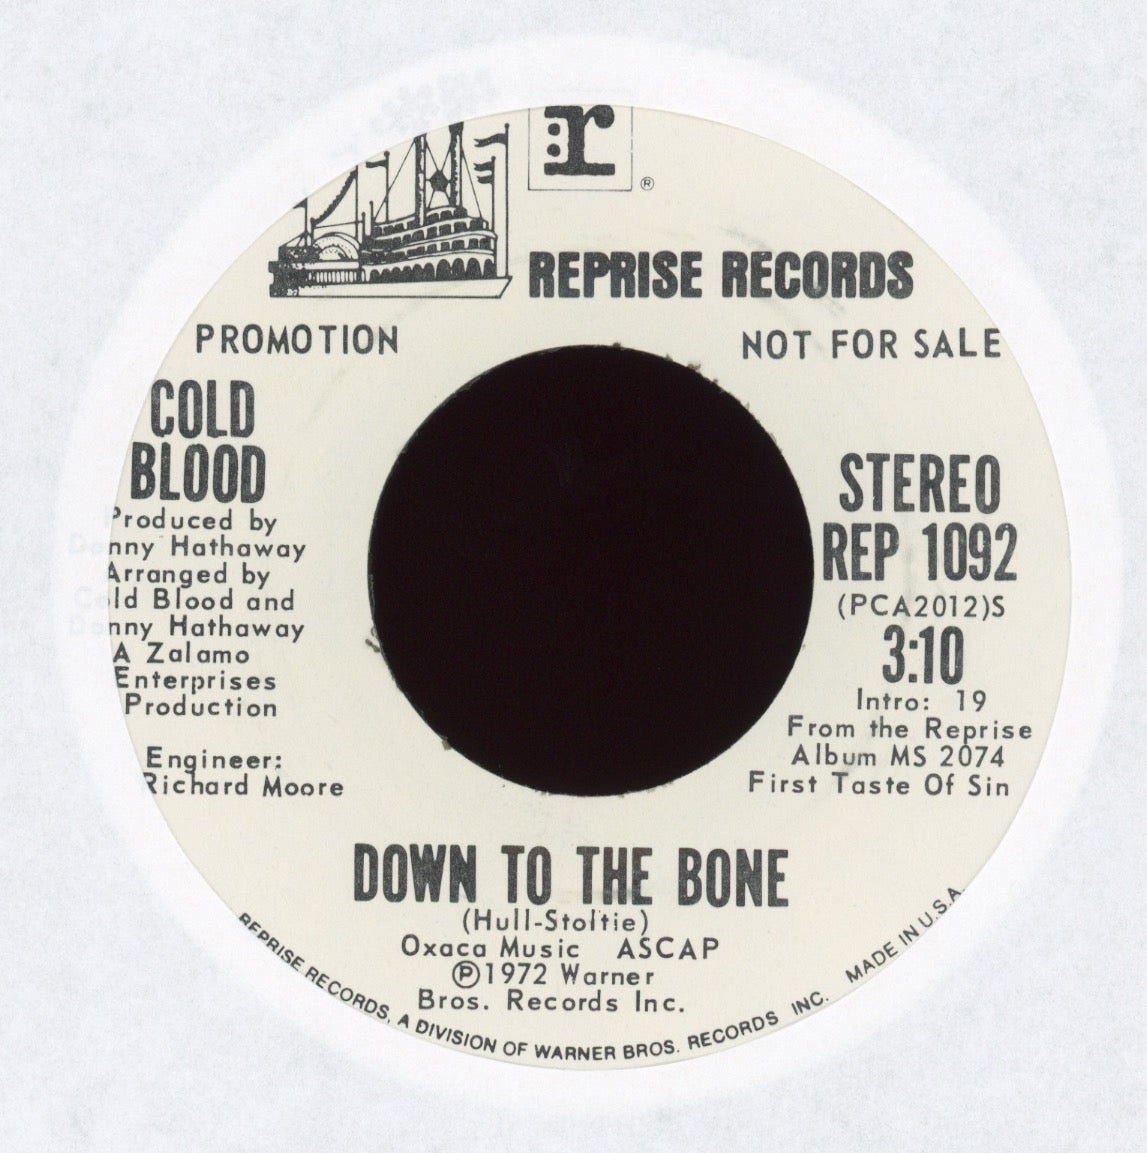 Cold Blood - Down To The Bone on Reprise Promo